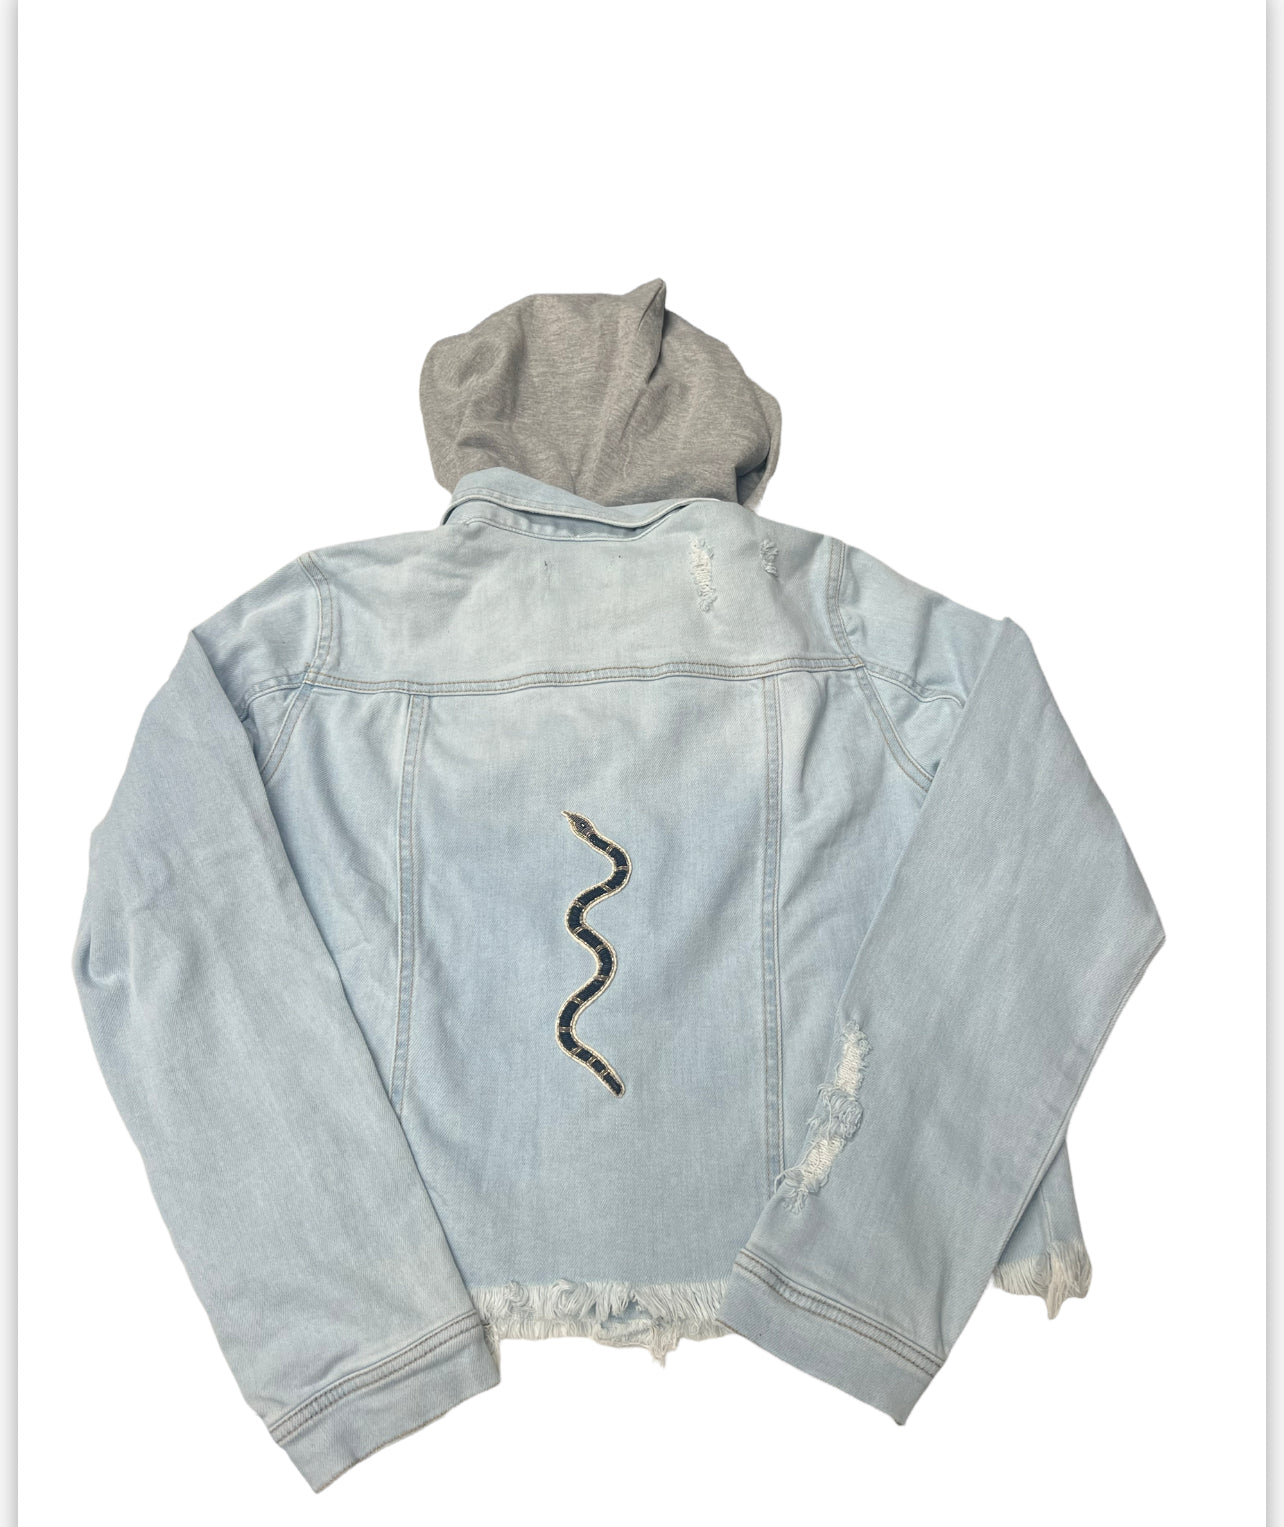 Collab Hooded “Charmed Middy” on Light Wash Denim Jacket